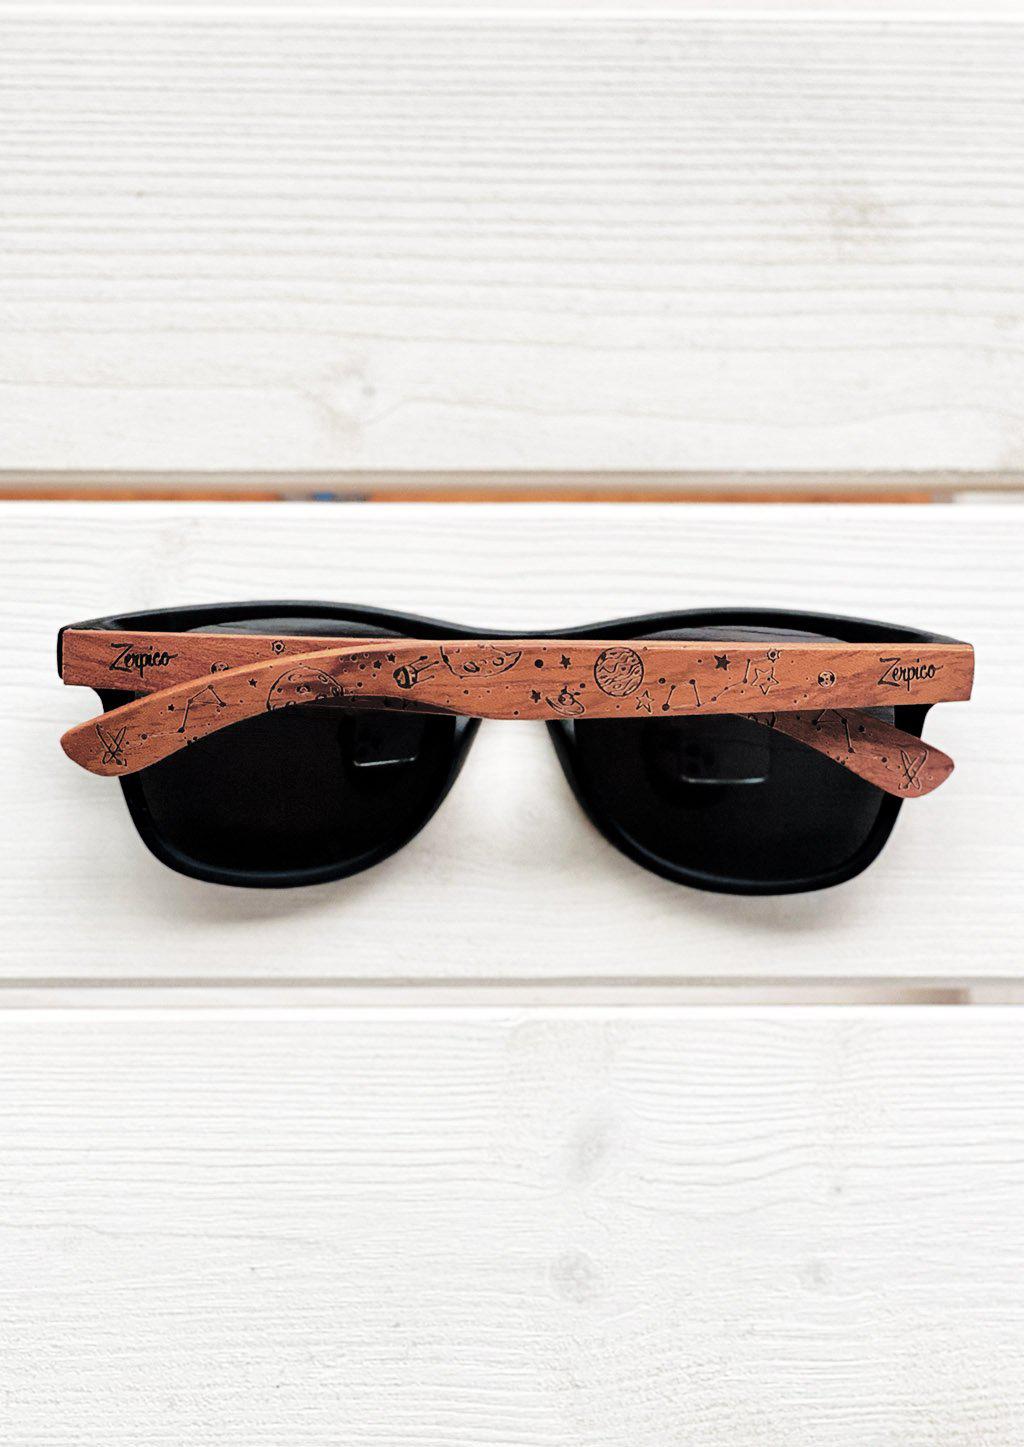 Our engraved sunglasses with motive from the stars and space. Outside on a park bench.